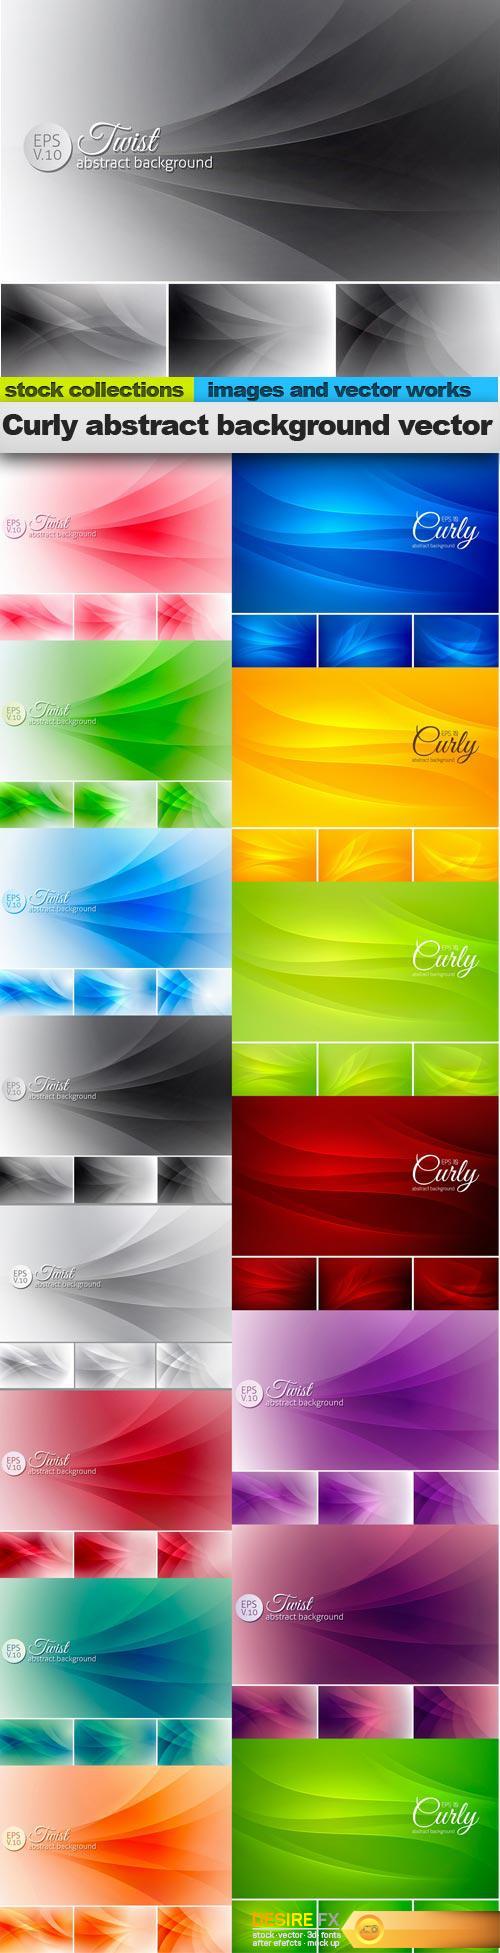 Curly abstract background vector, 15 x EPS